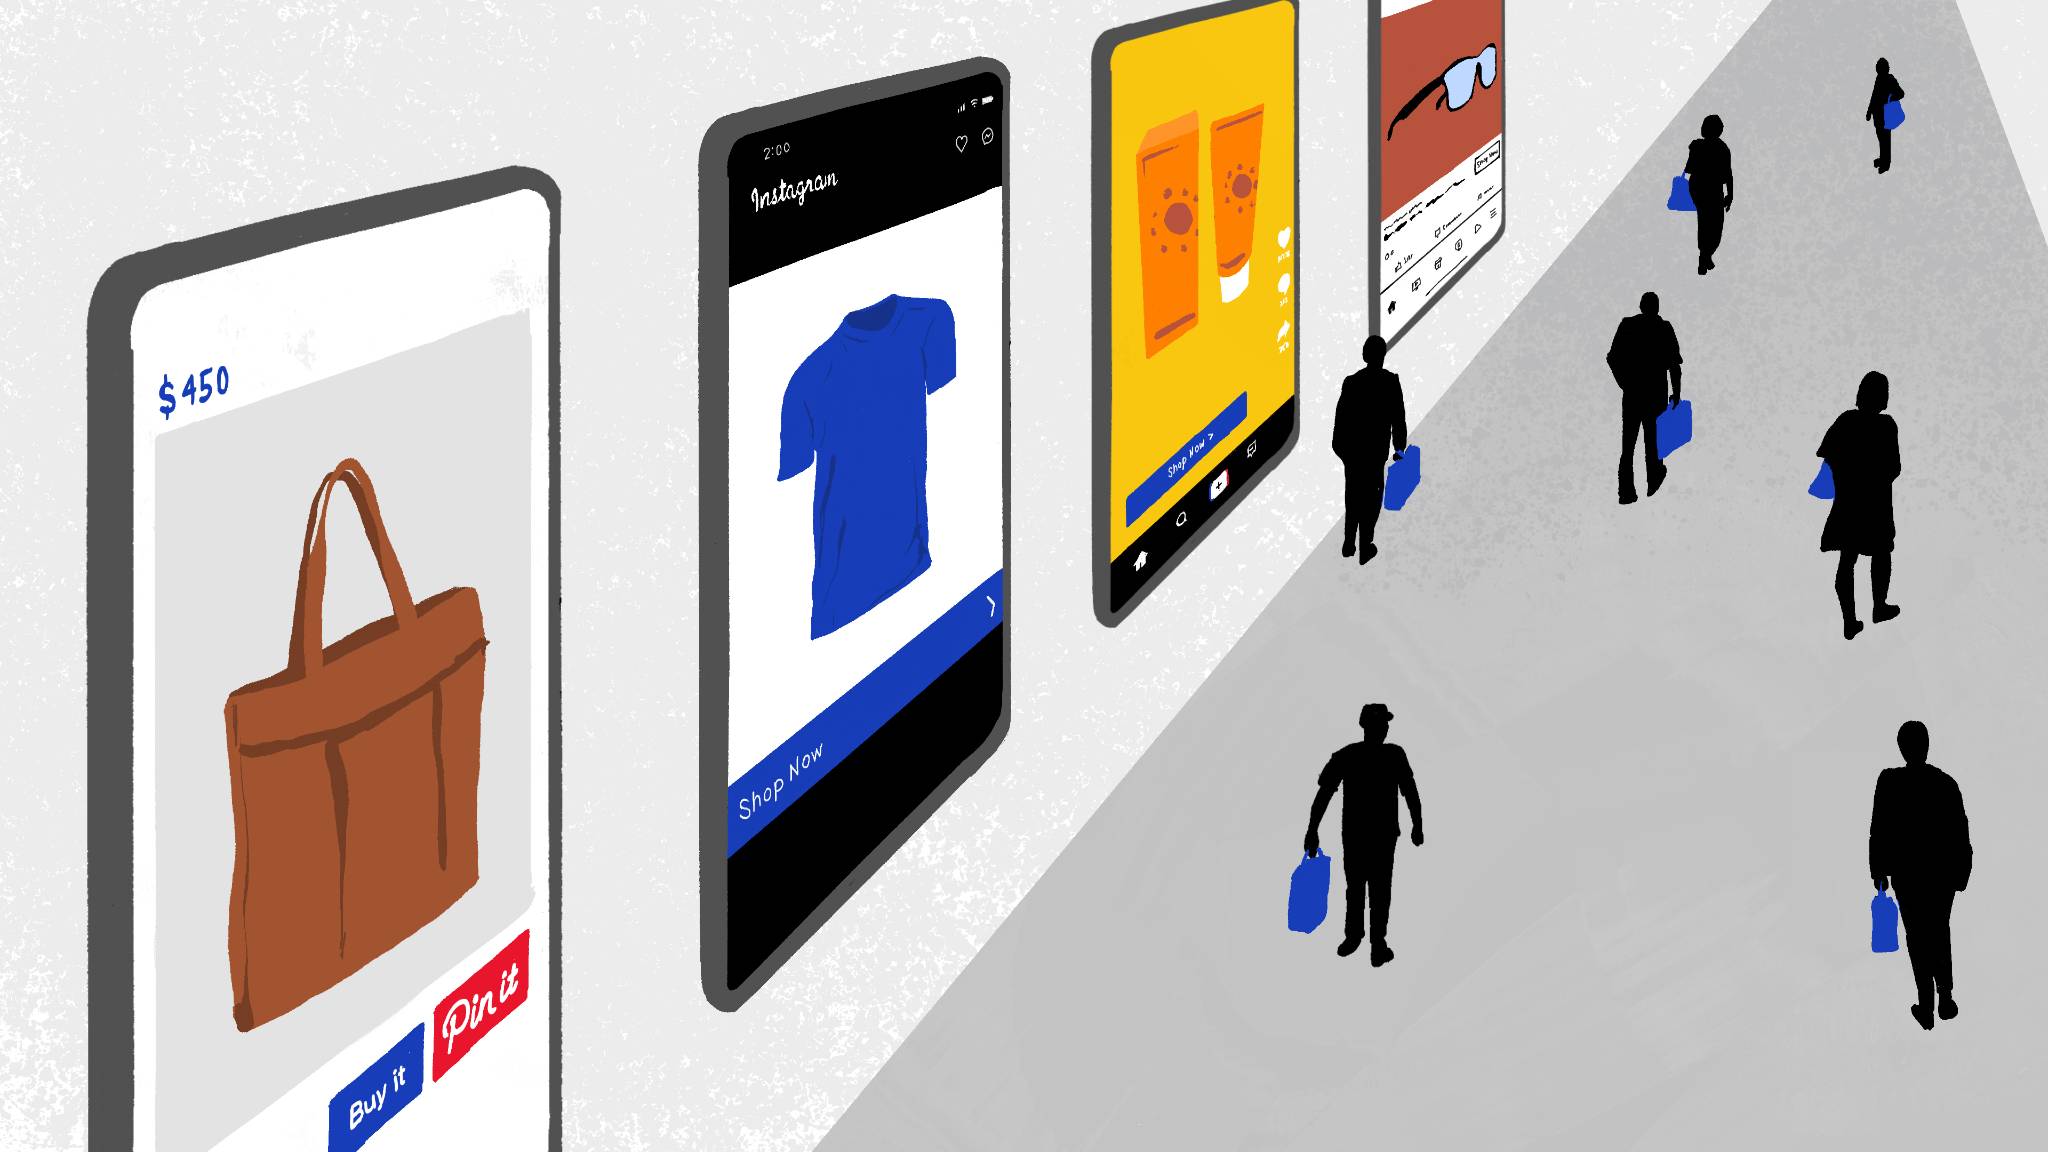 Simple solutions to cater to the growing number of mobile shoppers